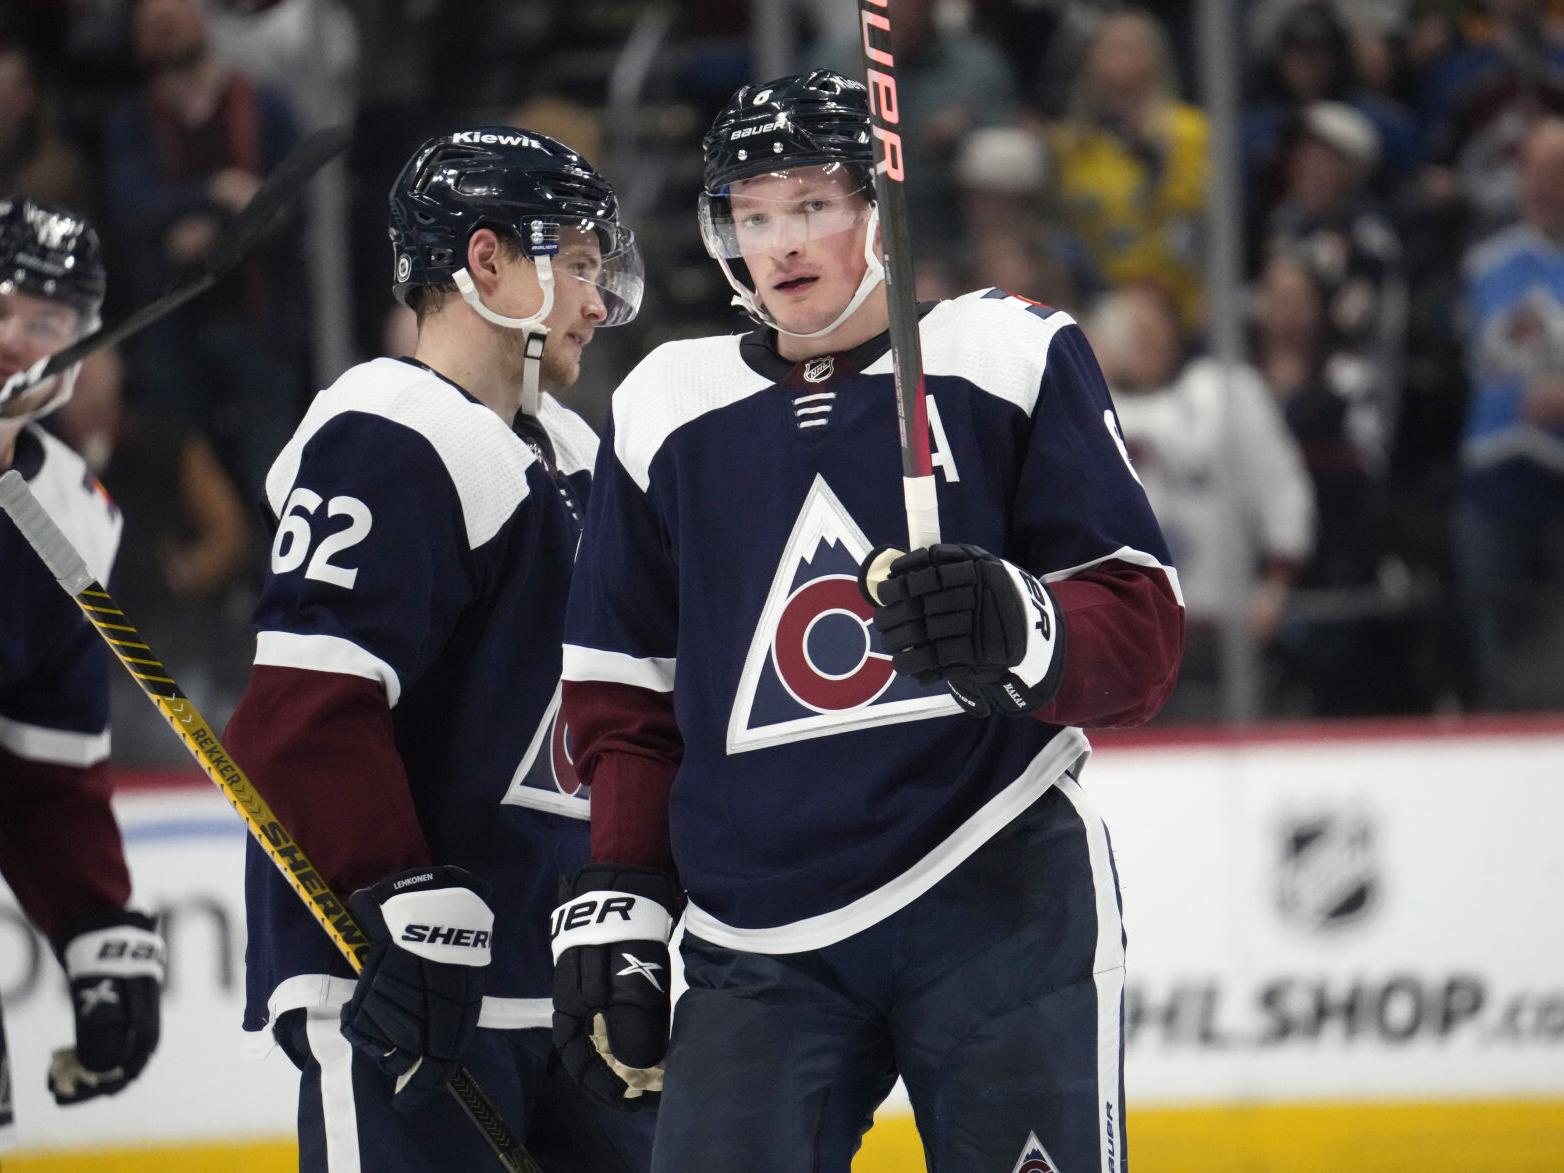 Grading Cale Makar and the Avalanche Defense